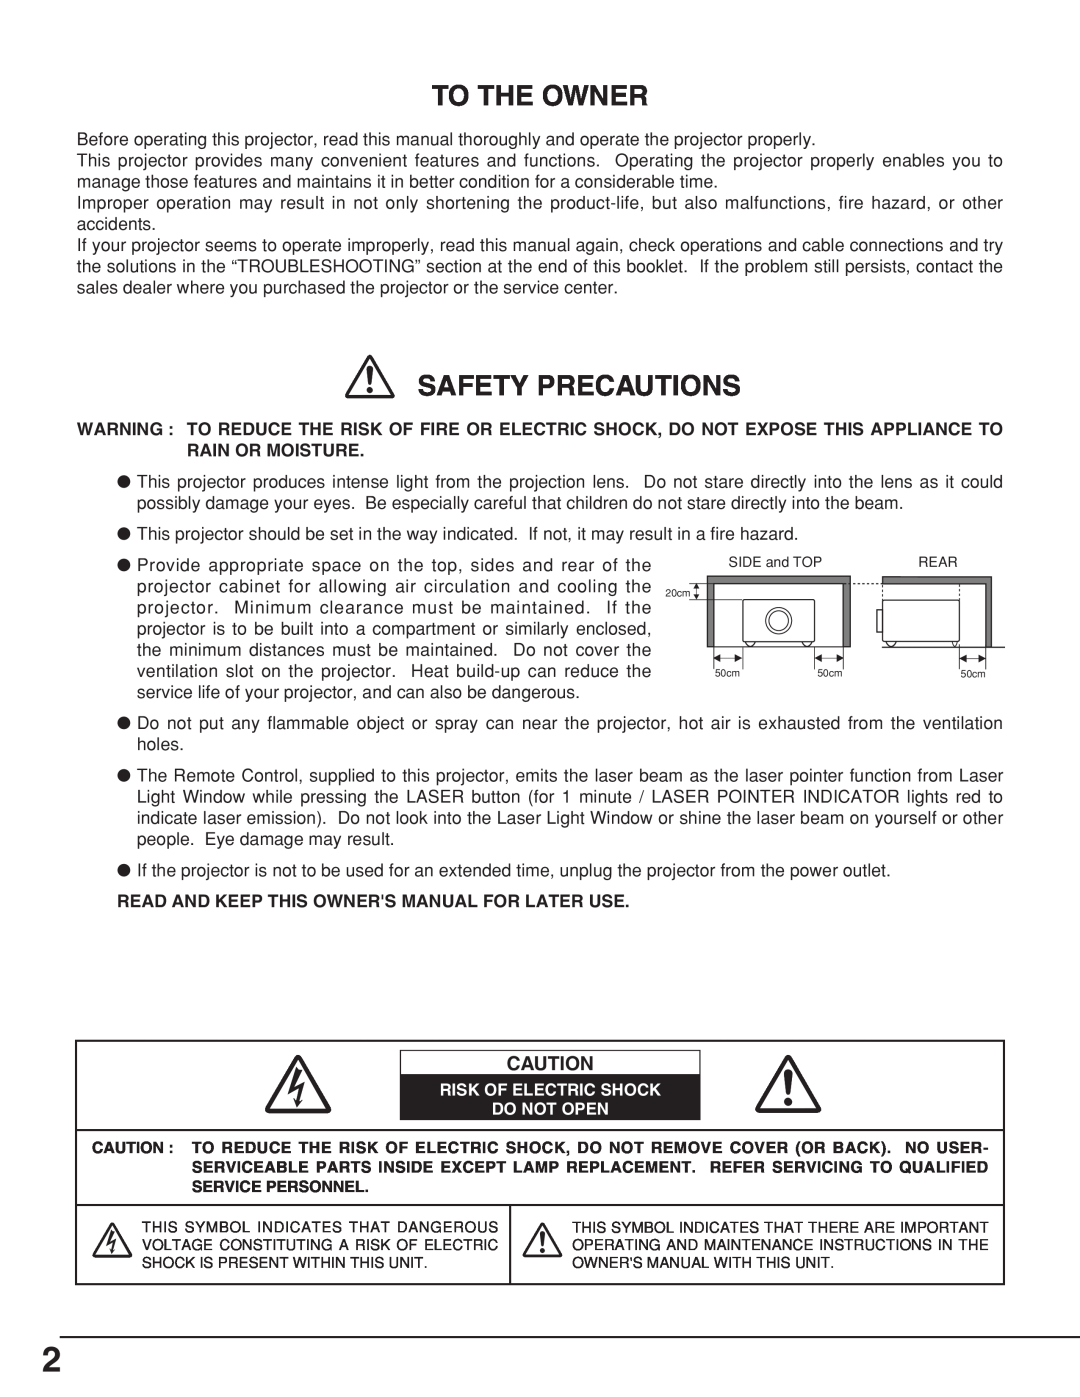 Eiki LC-XNB5M owner manual To The Owner, Safety Precautions, Risk Of Electric Shock Do Not Open 